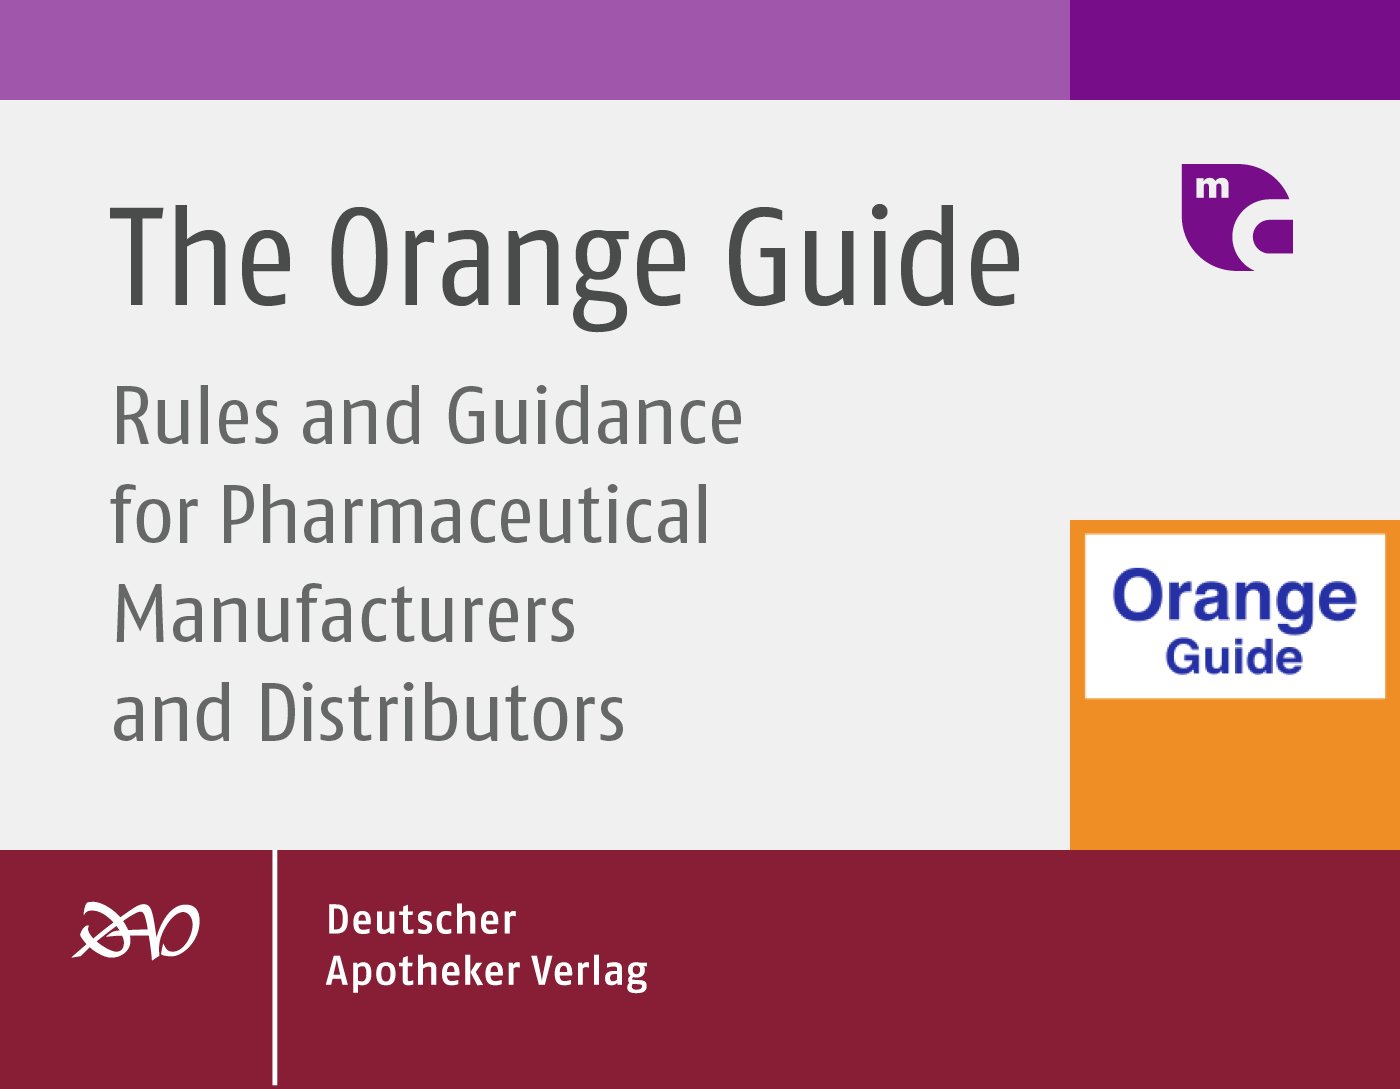 The Orange Guide:
Rules and Guidance for Pharmaceutical Manufacturers and Distributors